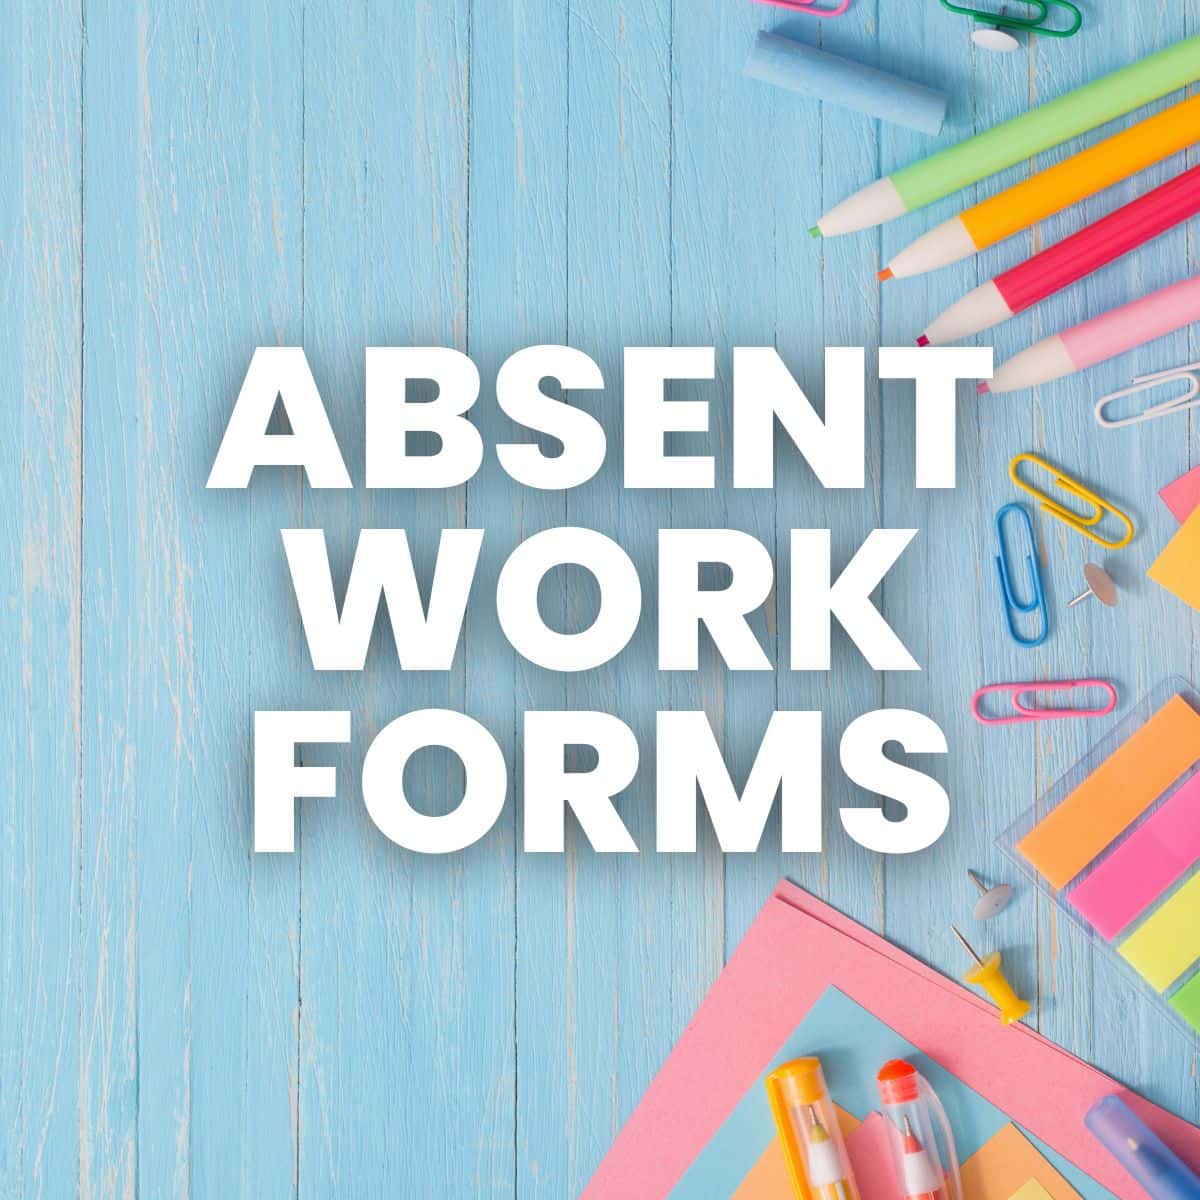 photograph of school supplies with text "absent work forms"